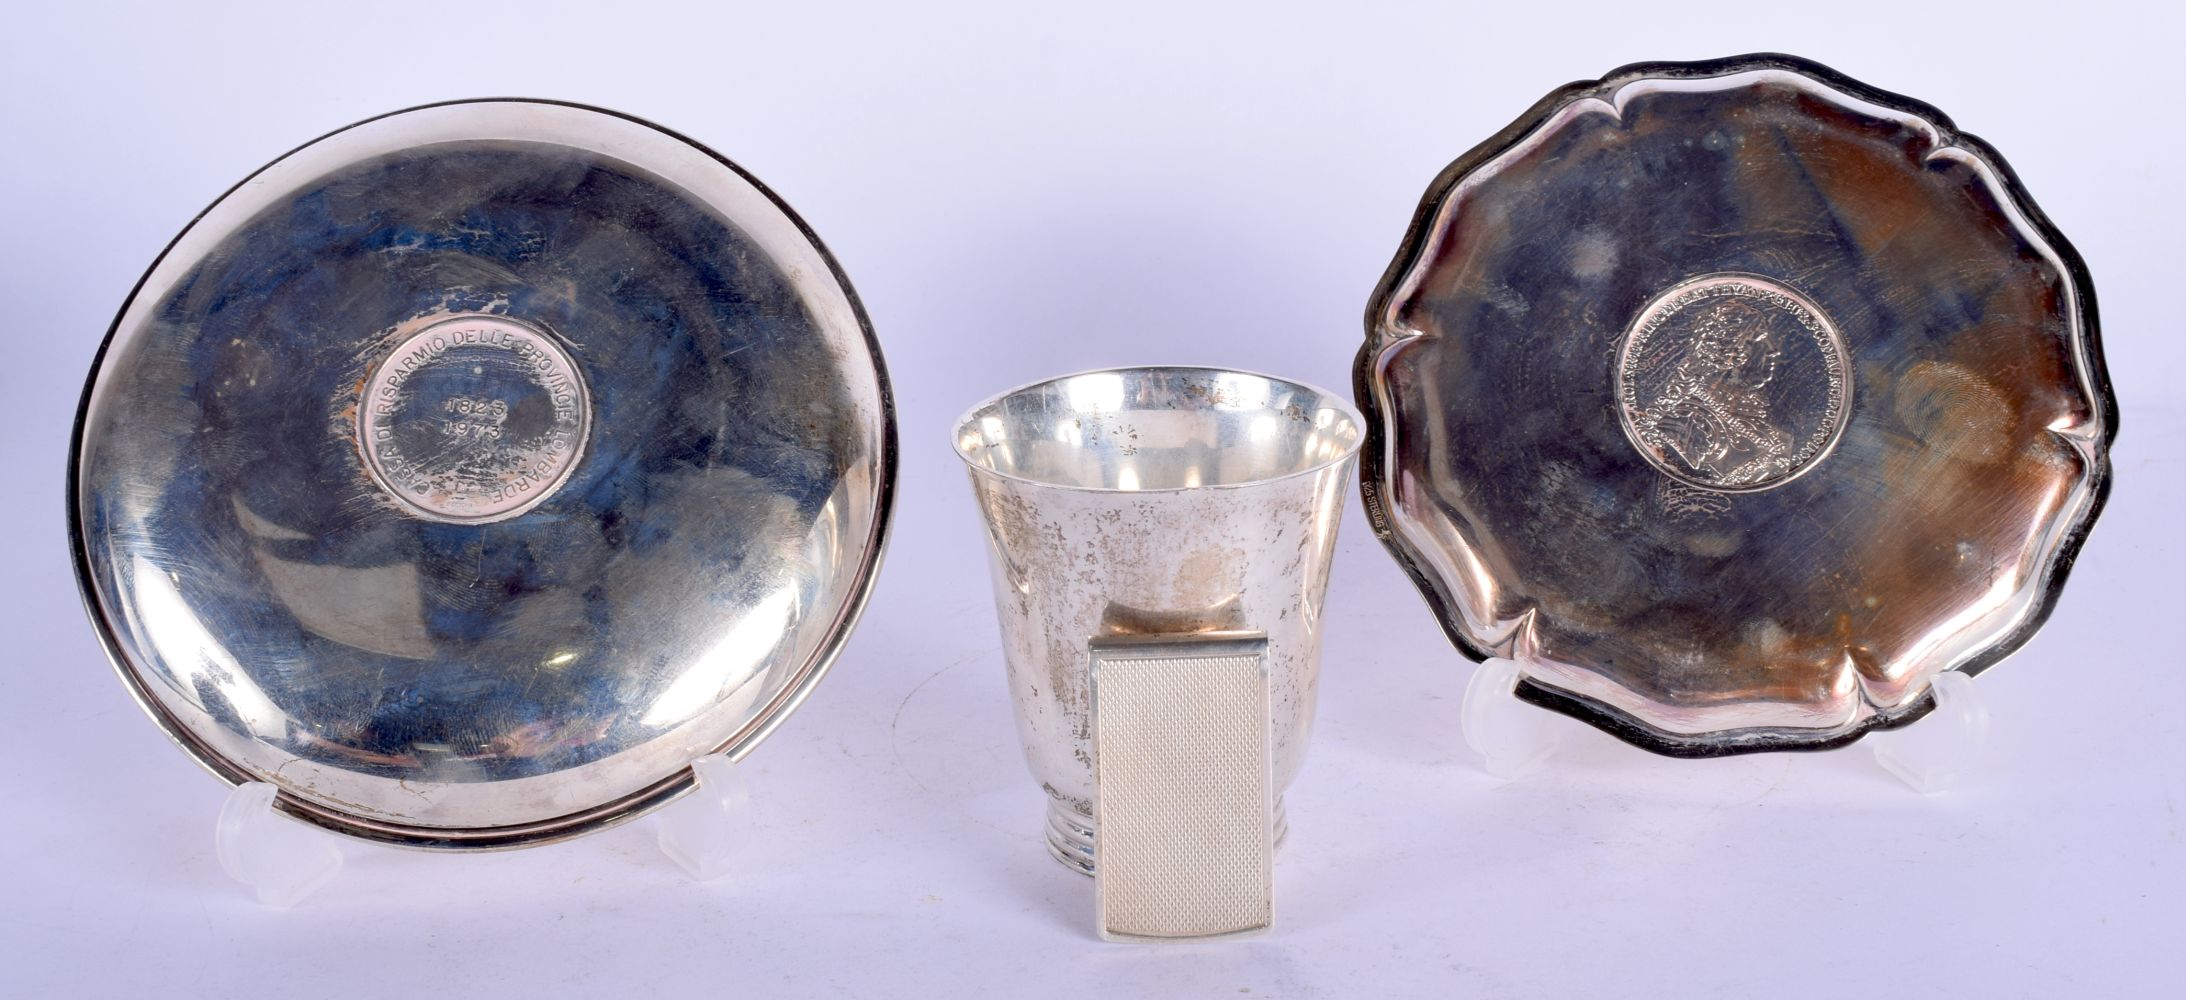 A STERLING SILVER BEAKER together with a money clip & dish. 395 grams. Largest 15 cm wide. (3) - Image 2 of 4